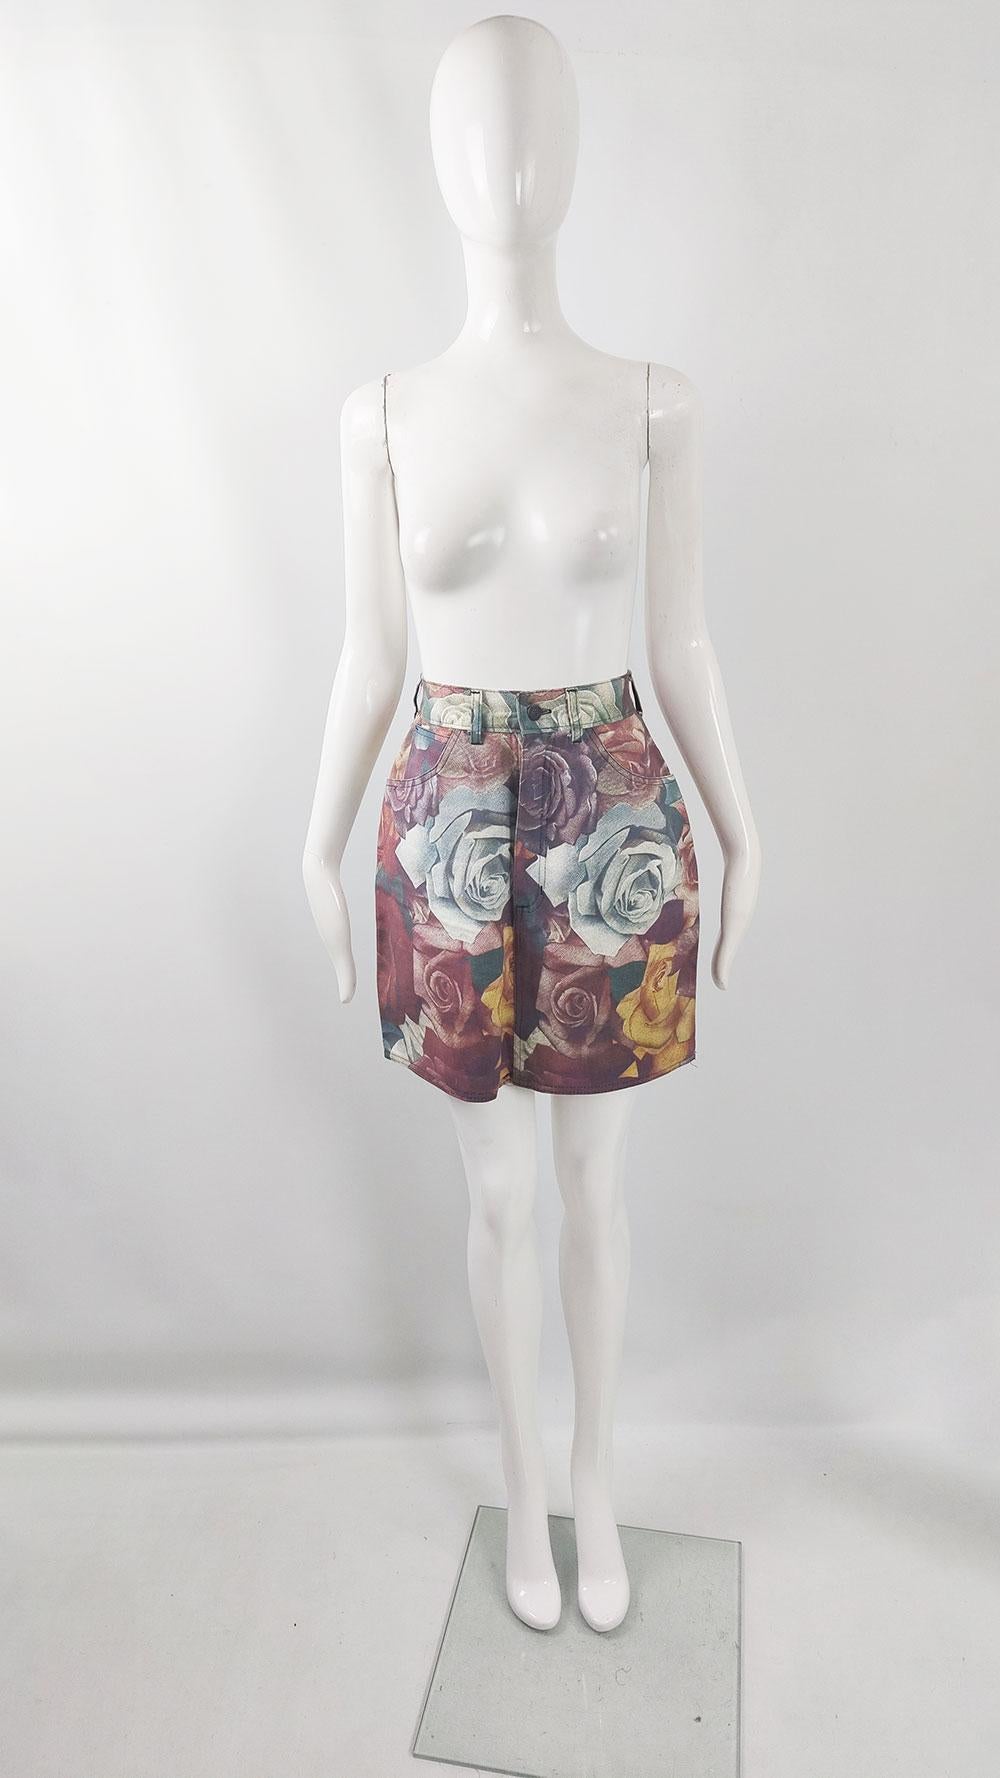 A striking late 80s/early 90s vintage women's skirt by the cult British label Modzart, founded by renowned artists John Dove and Molly White. Known for their irreverent punk-inspired works, this skirt showcases a photorealistic rose pattern in